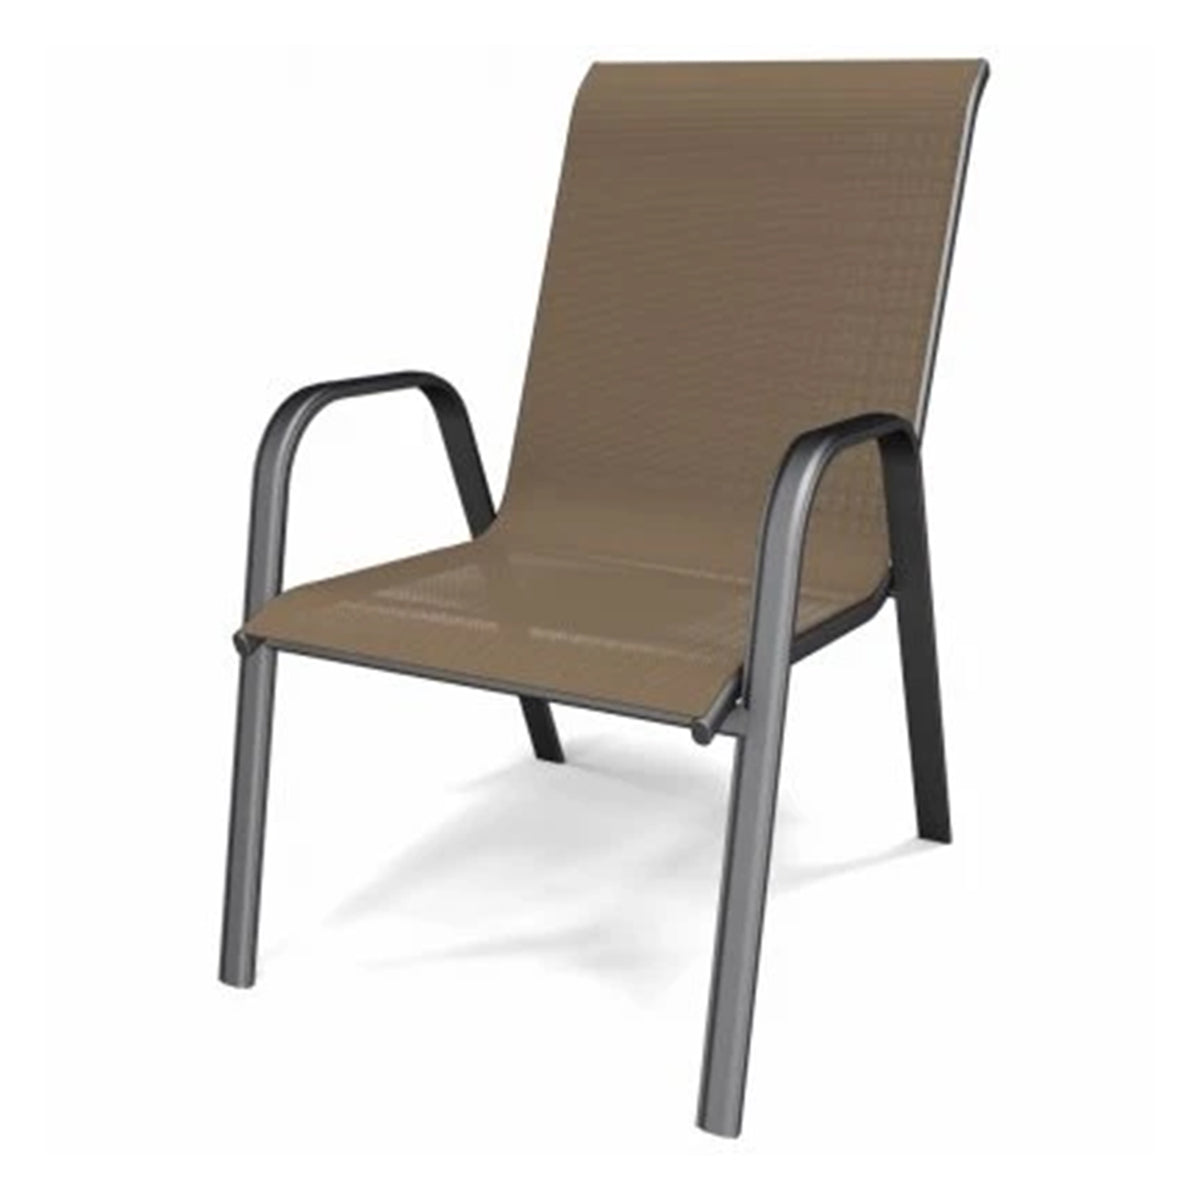 Stackable, Steel, Tan Sling Fabric chair